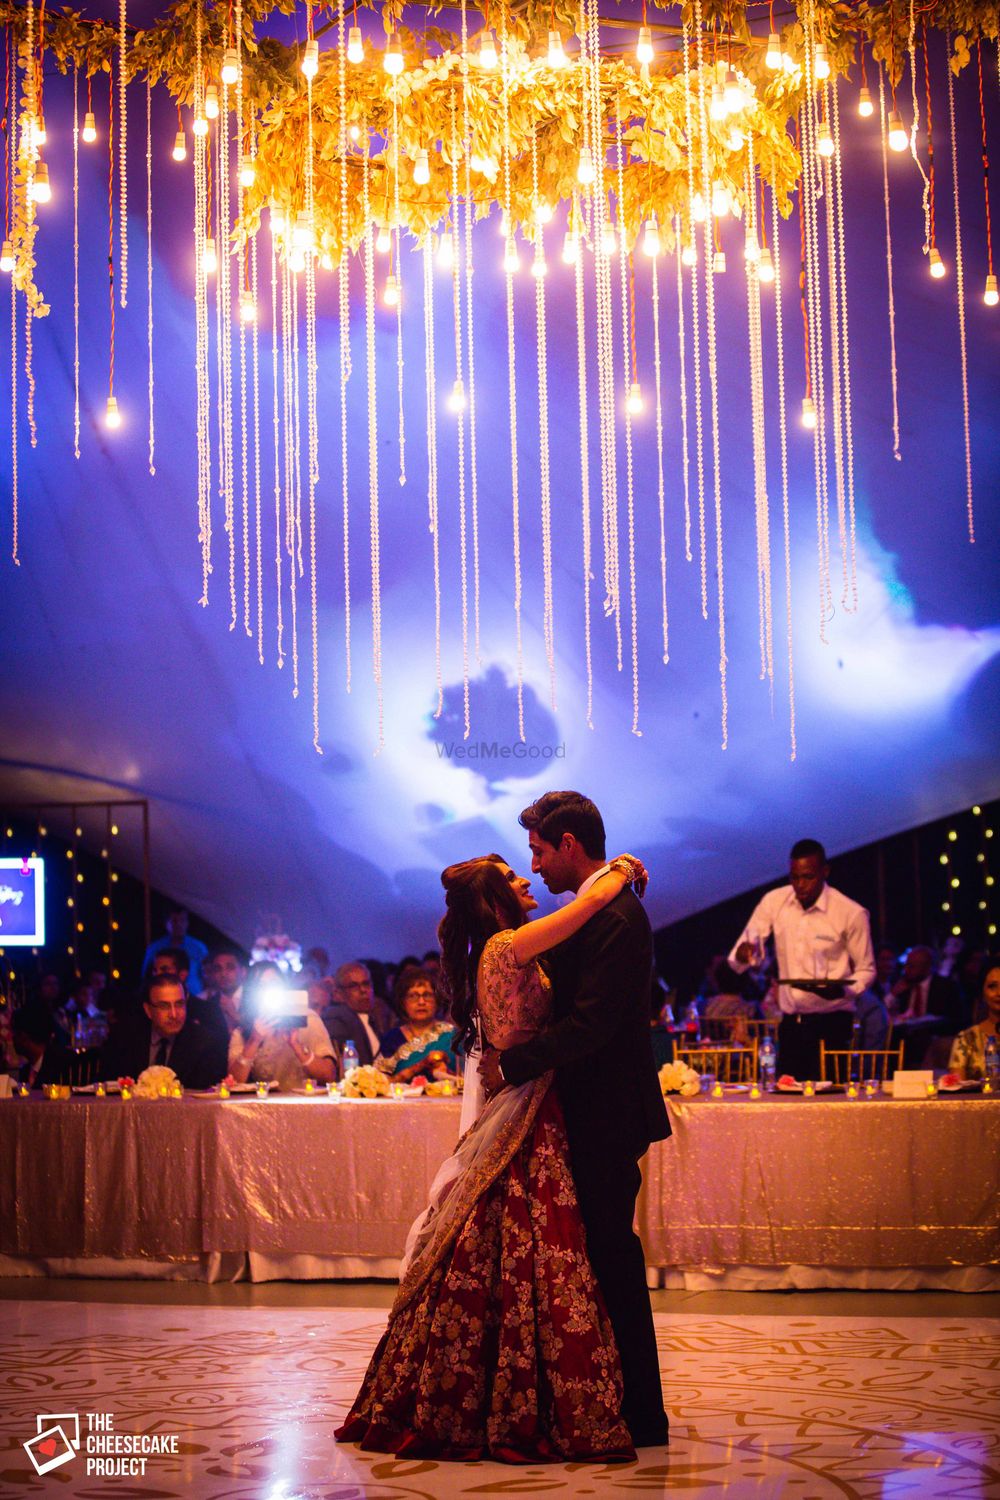 Photo of Couple dancing under chandelier with fairy lights